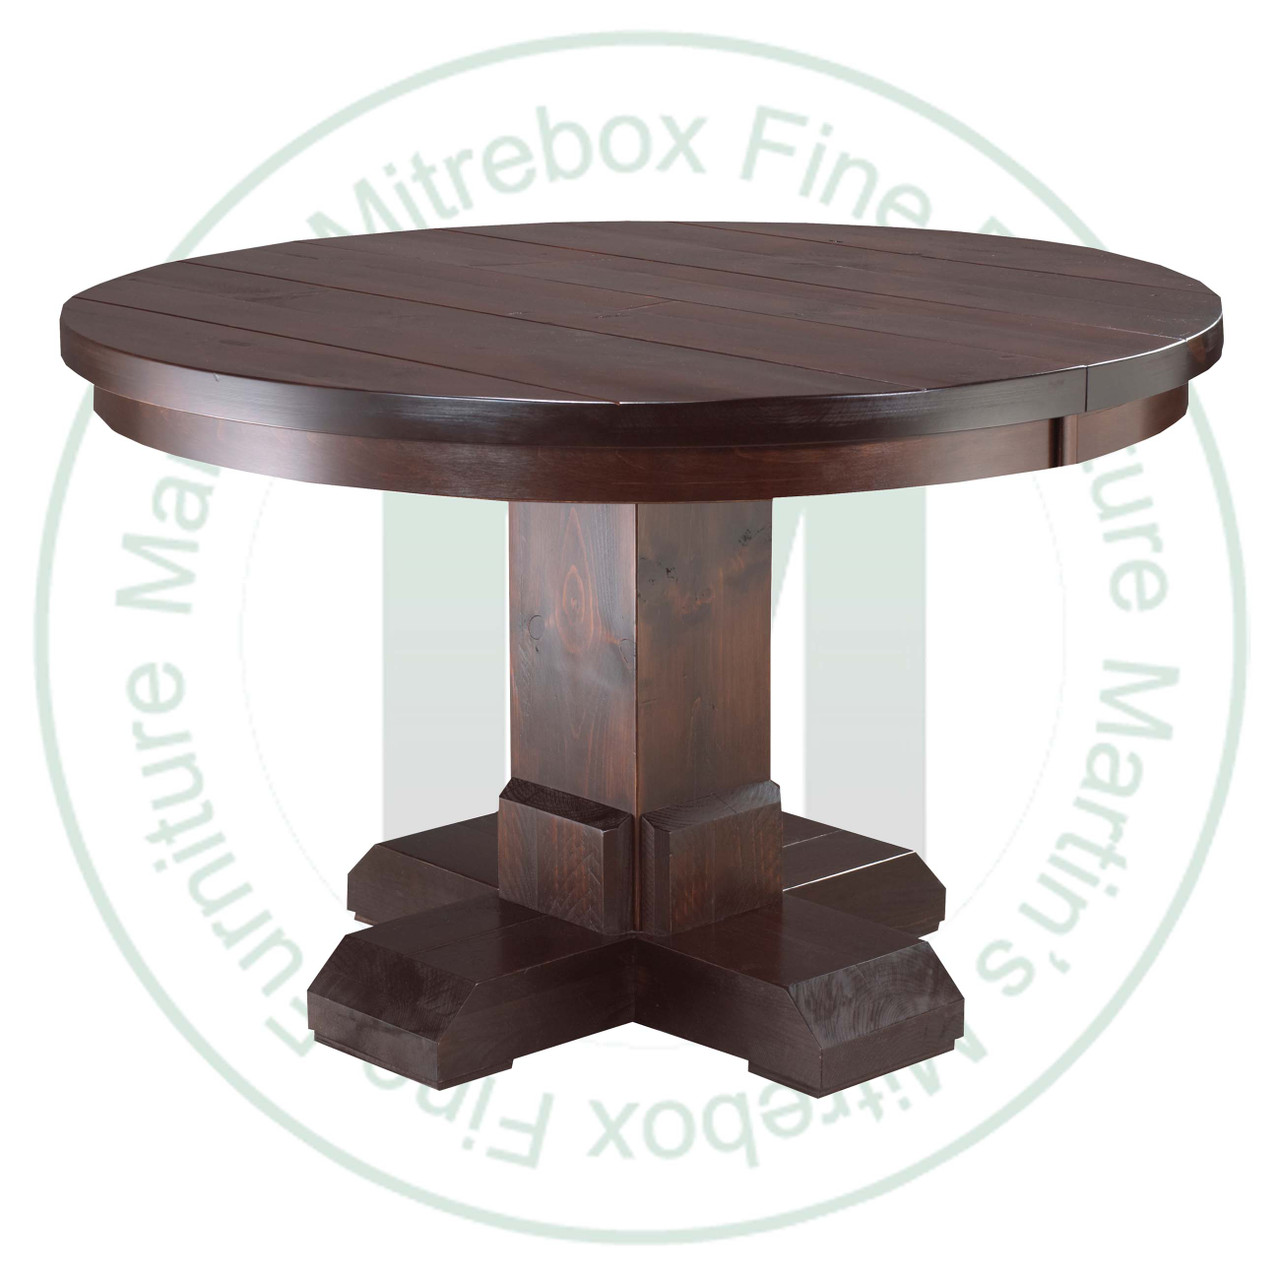 Maple Shrewsbury Single Pedestal Table 60''D x 60''W x 30''H Round Solid Table. Table Has 1.25'' Thick Top.